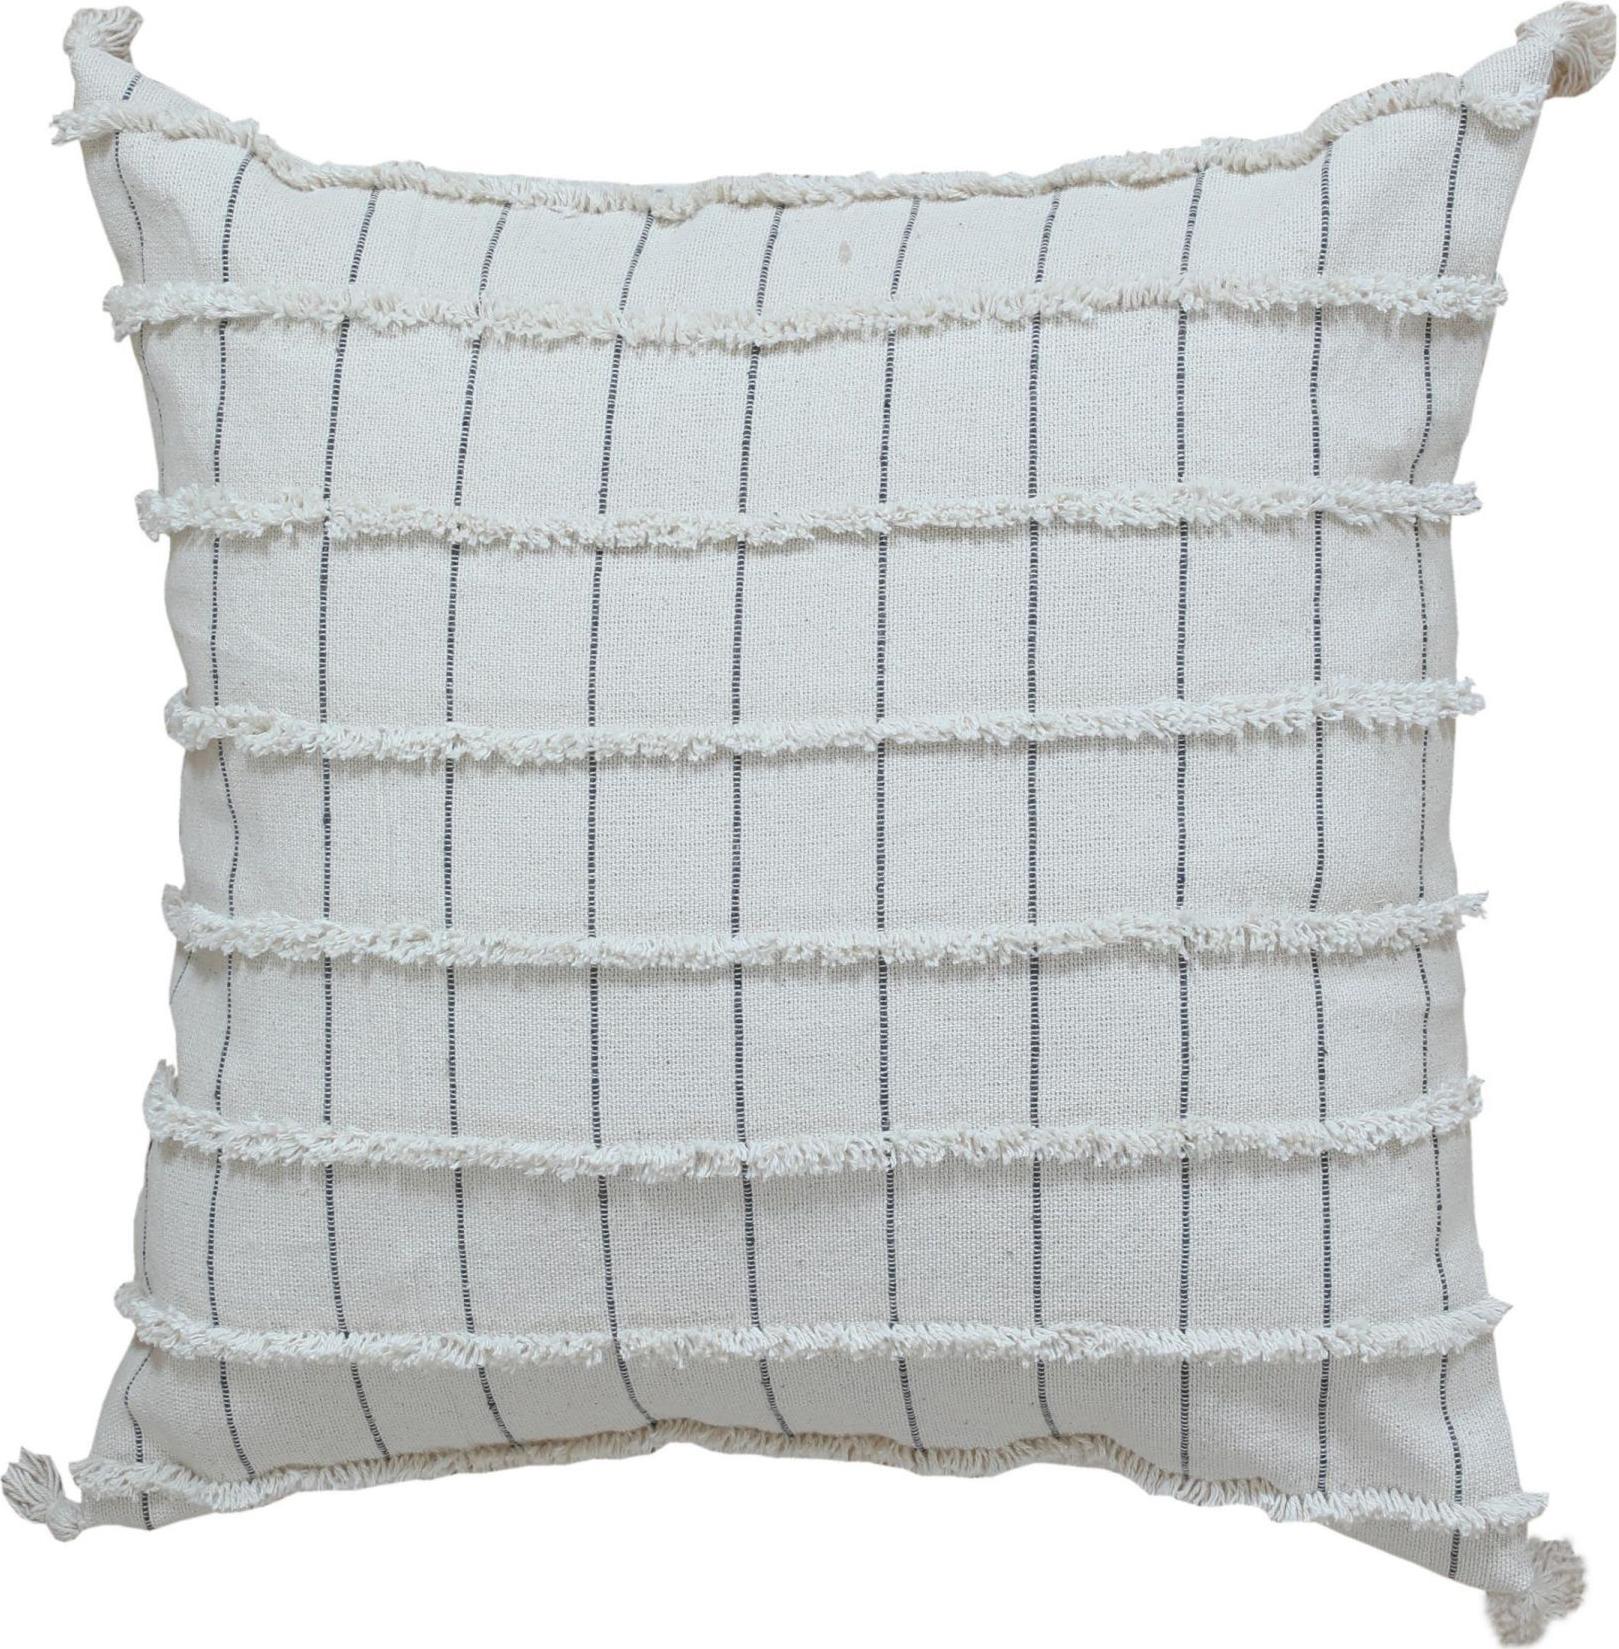 Geometric Modern Wool and Cotton Pillow In White In New Condition For Sale In Norwalk, CT